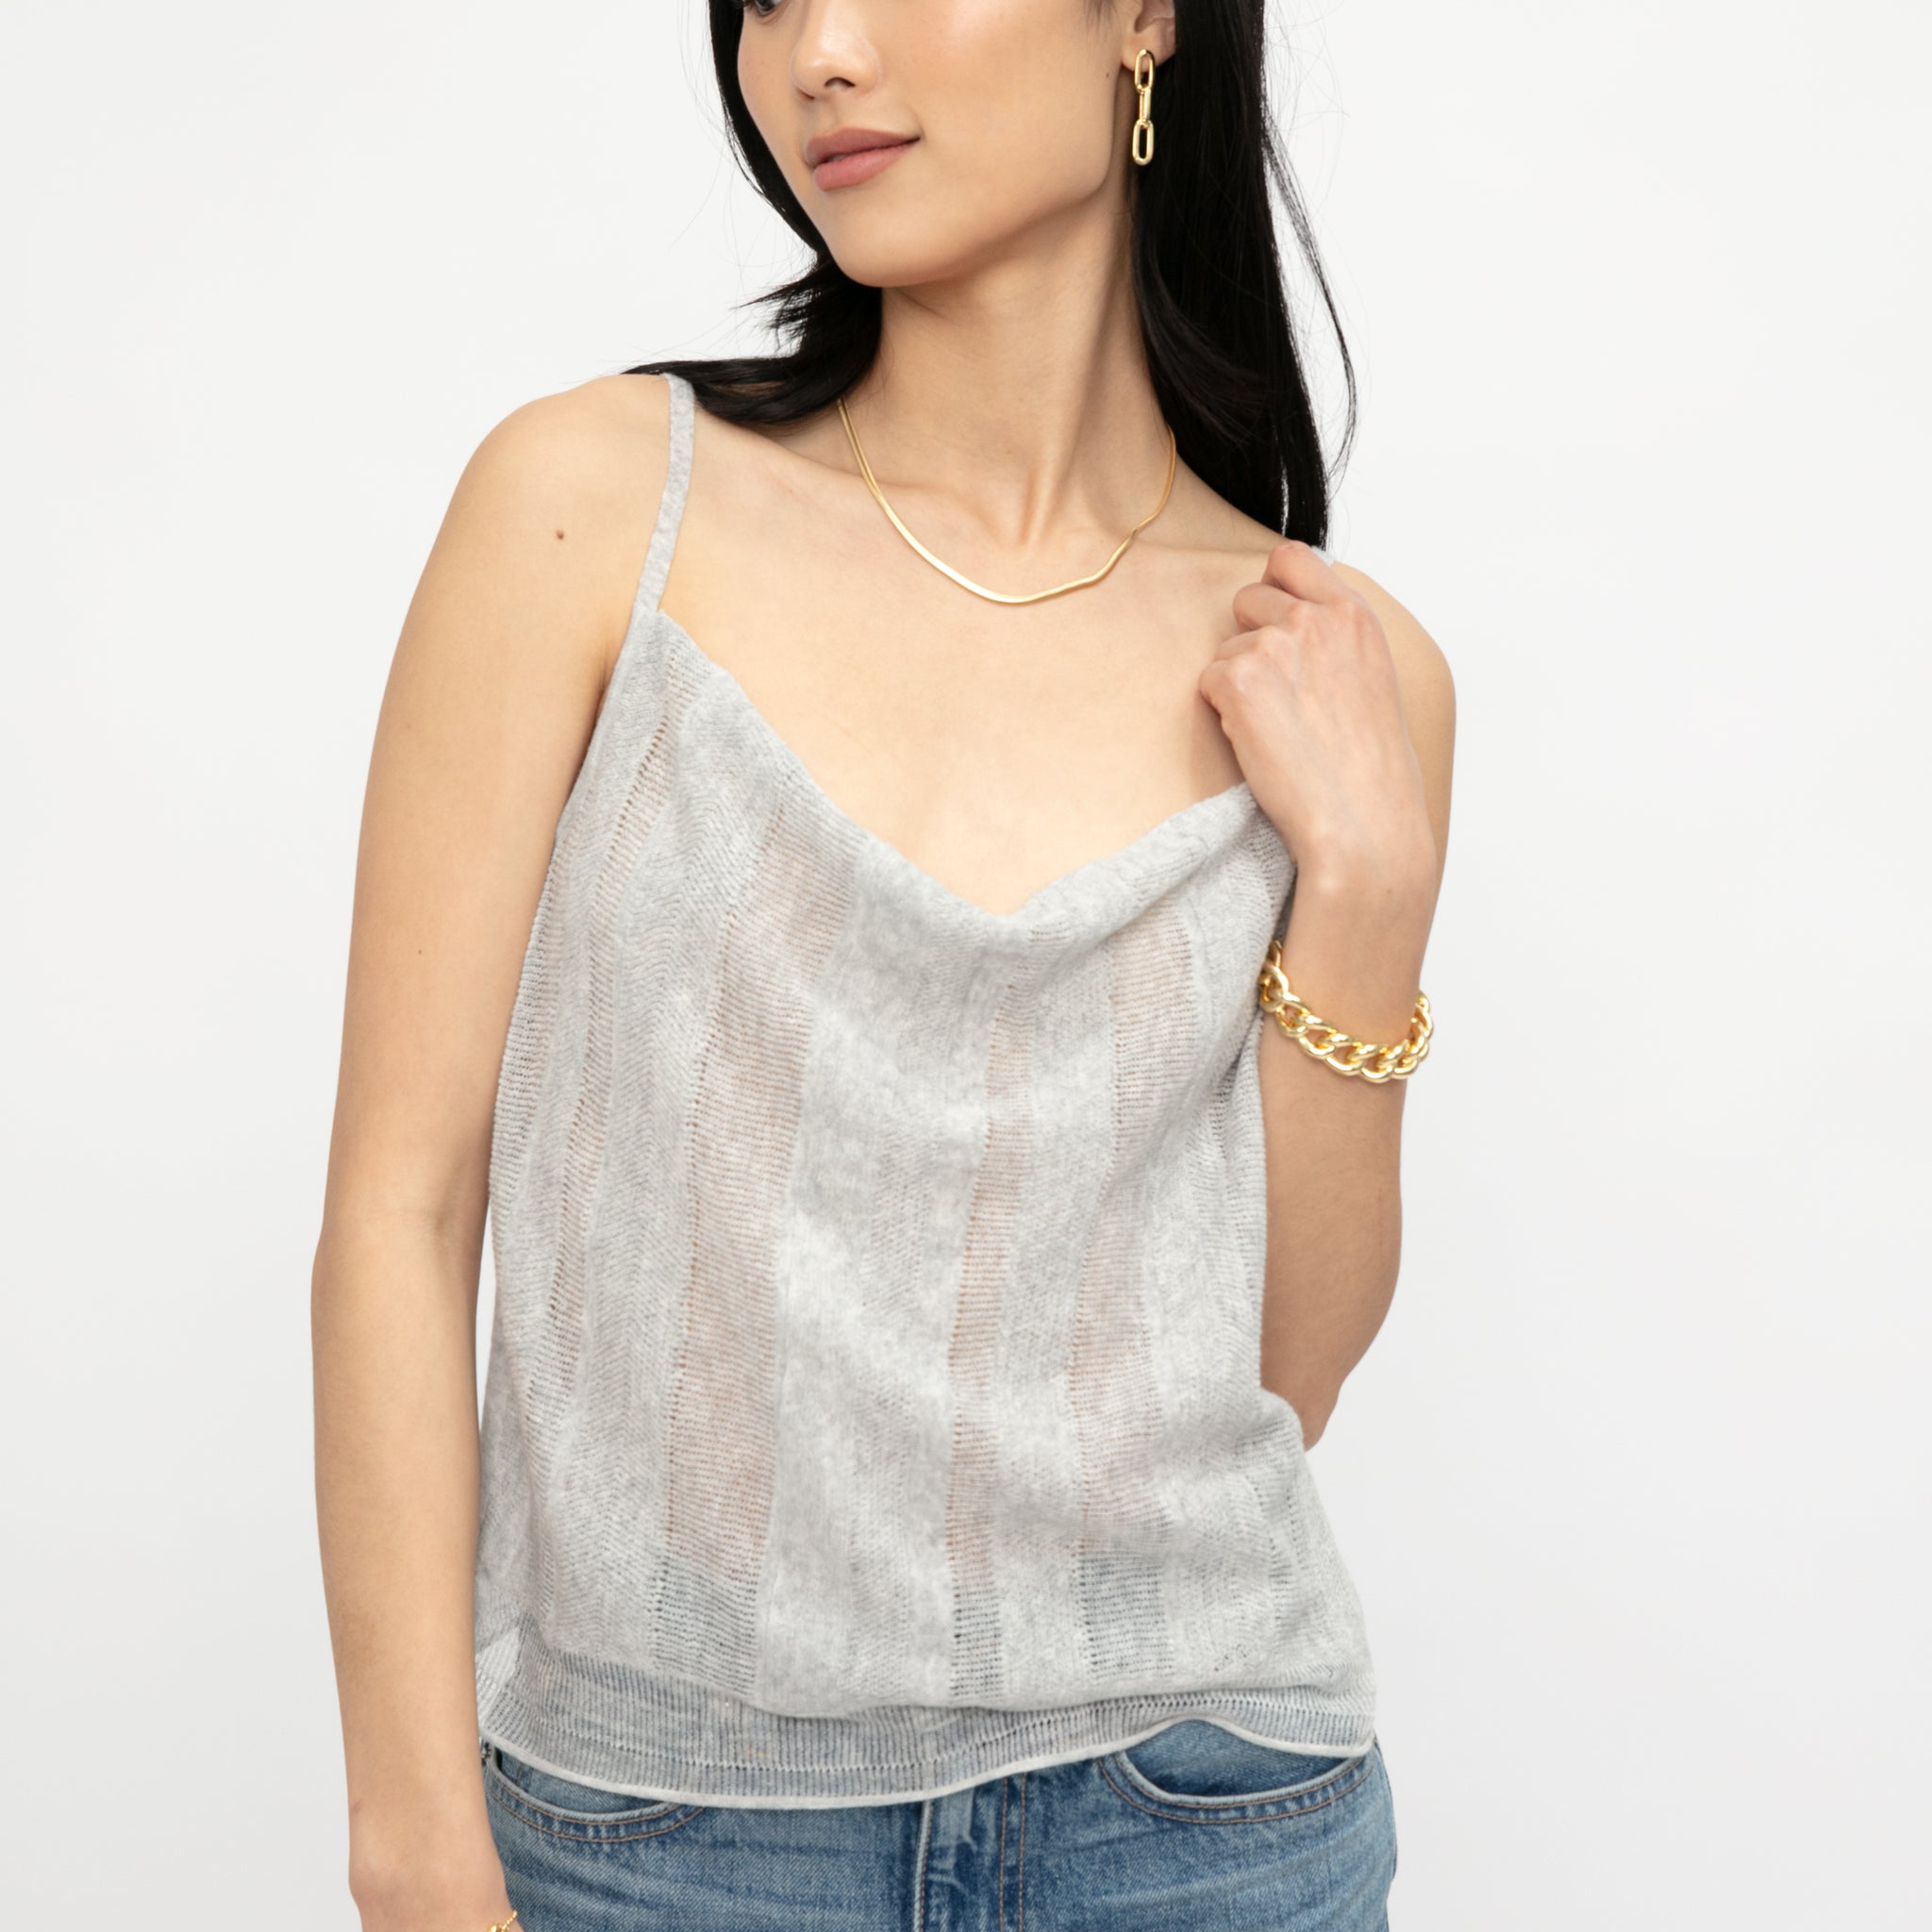 ATM Linen Cotton Camisole in Shimmer